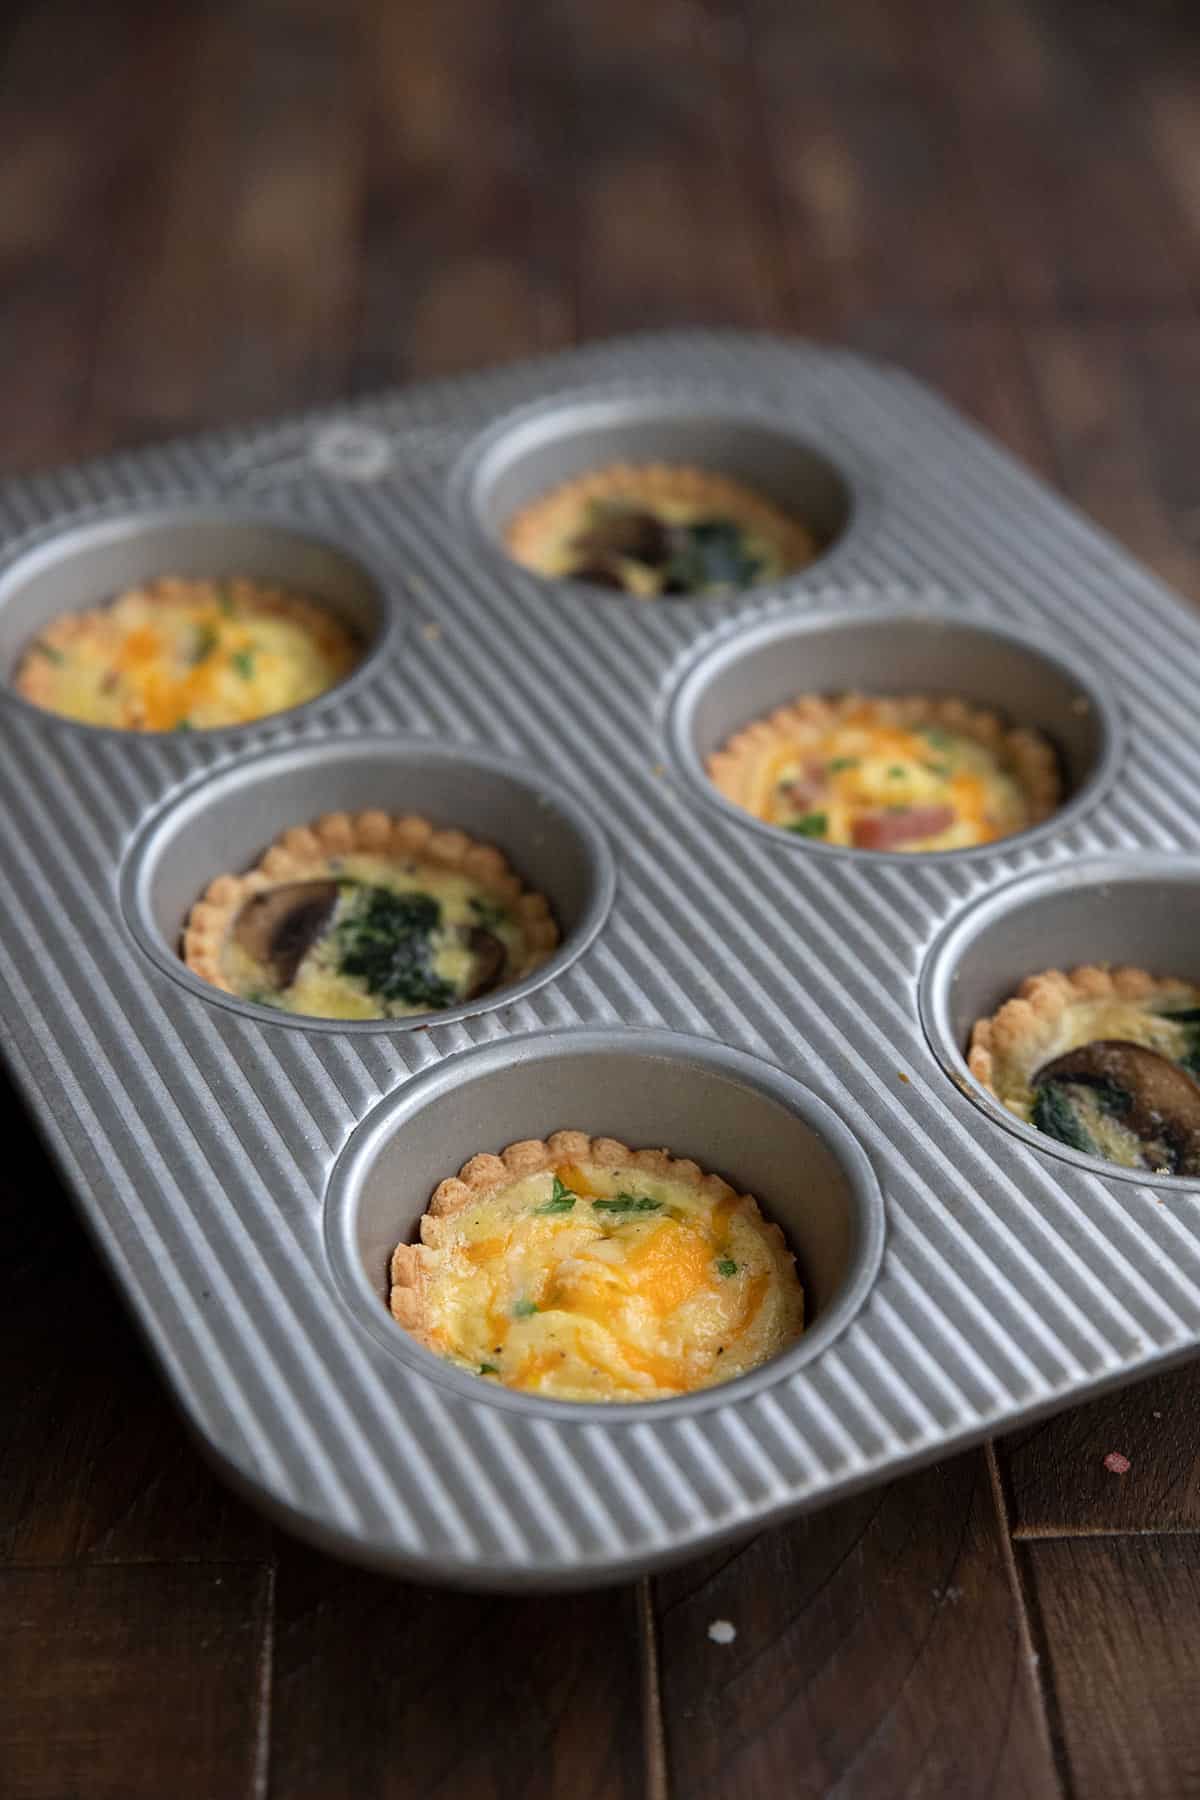 Two flavors of mini quiche in a metal muffin pan on a brown wooden table.